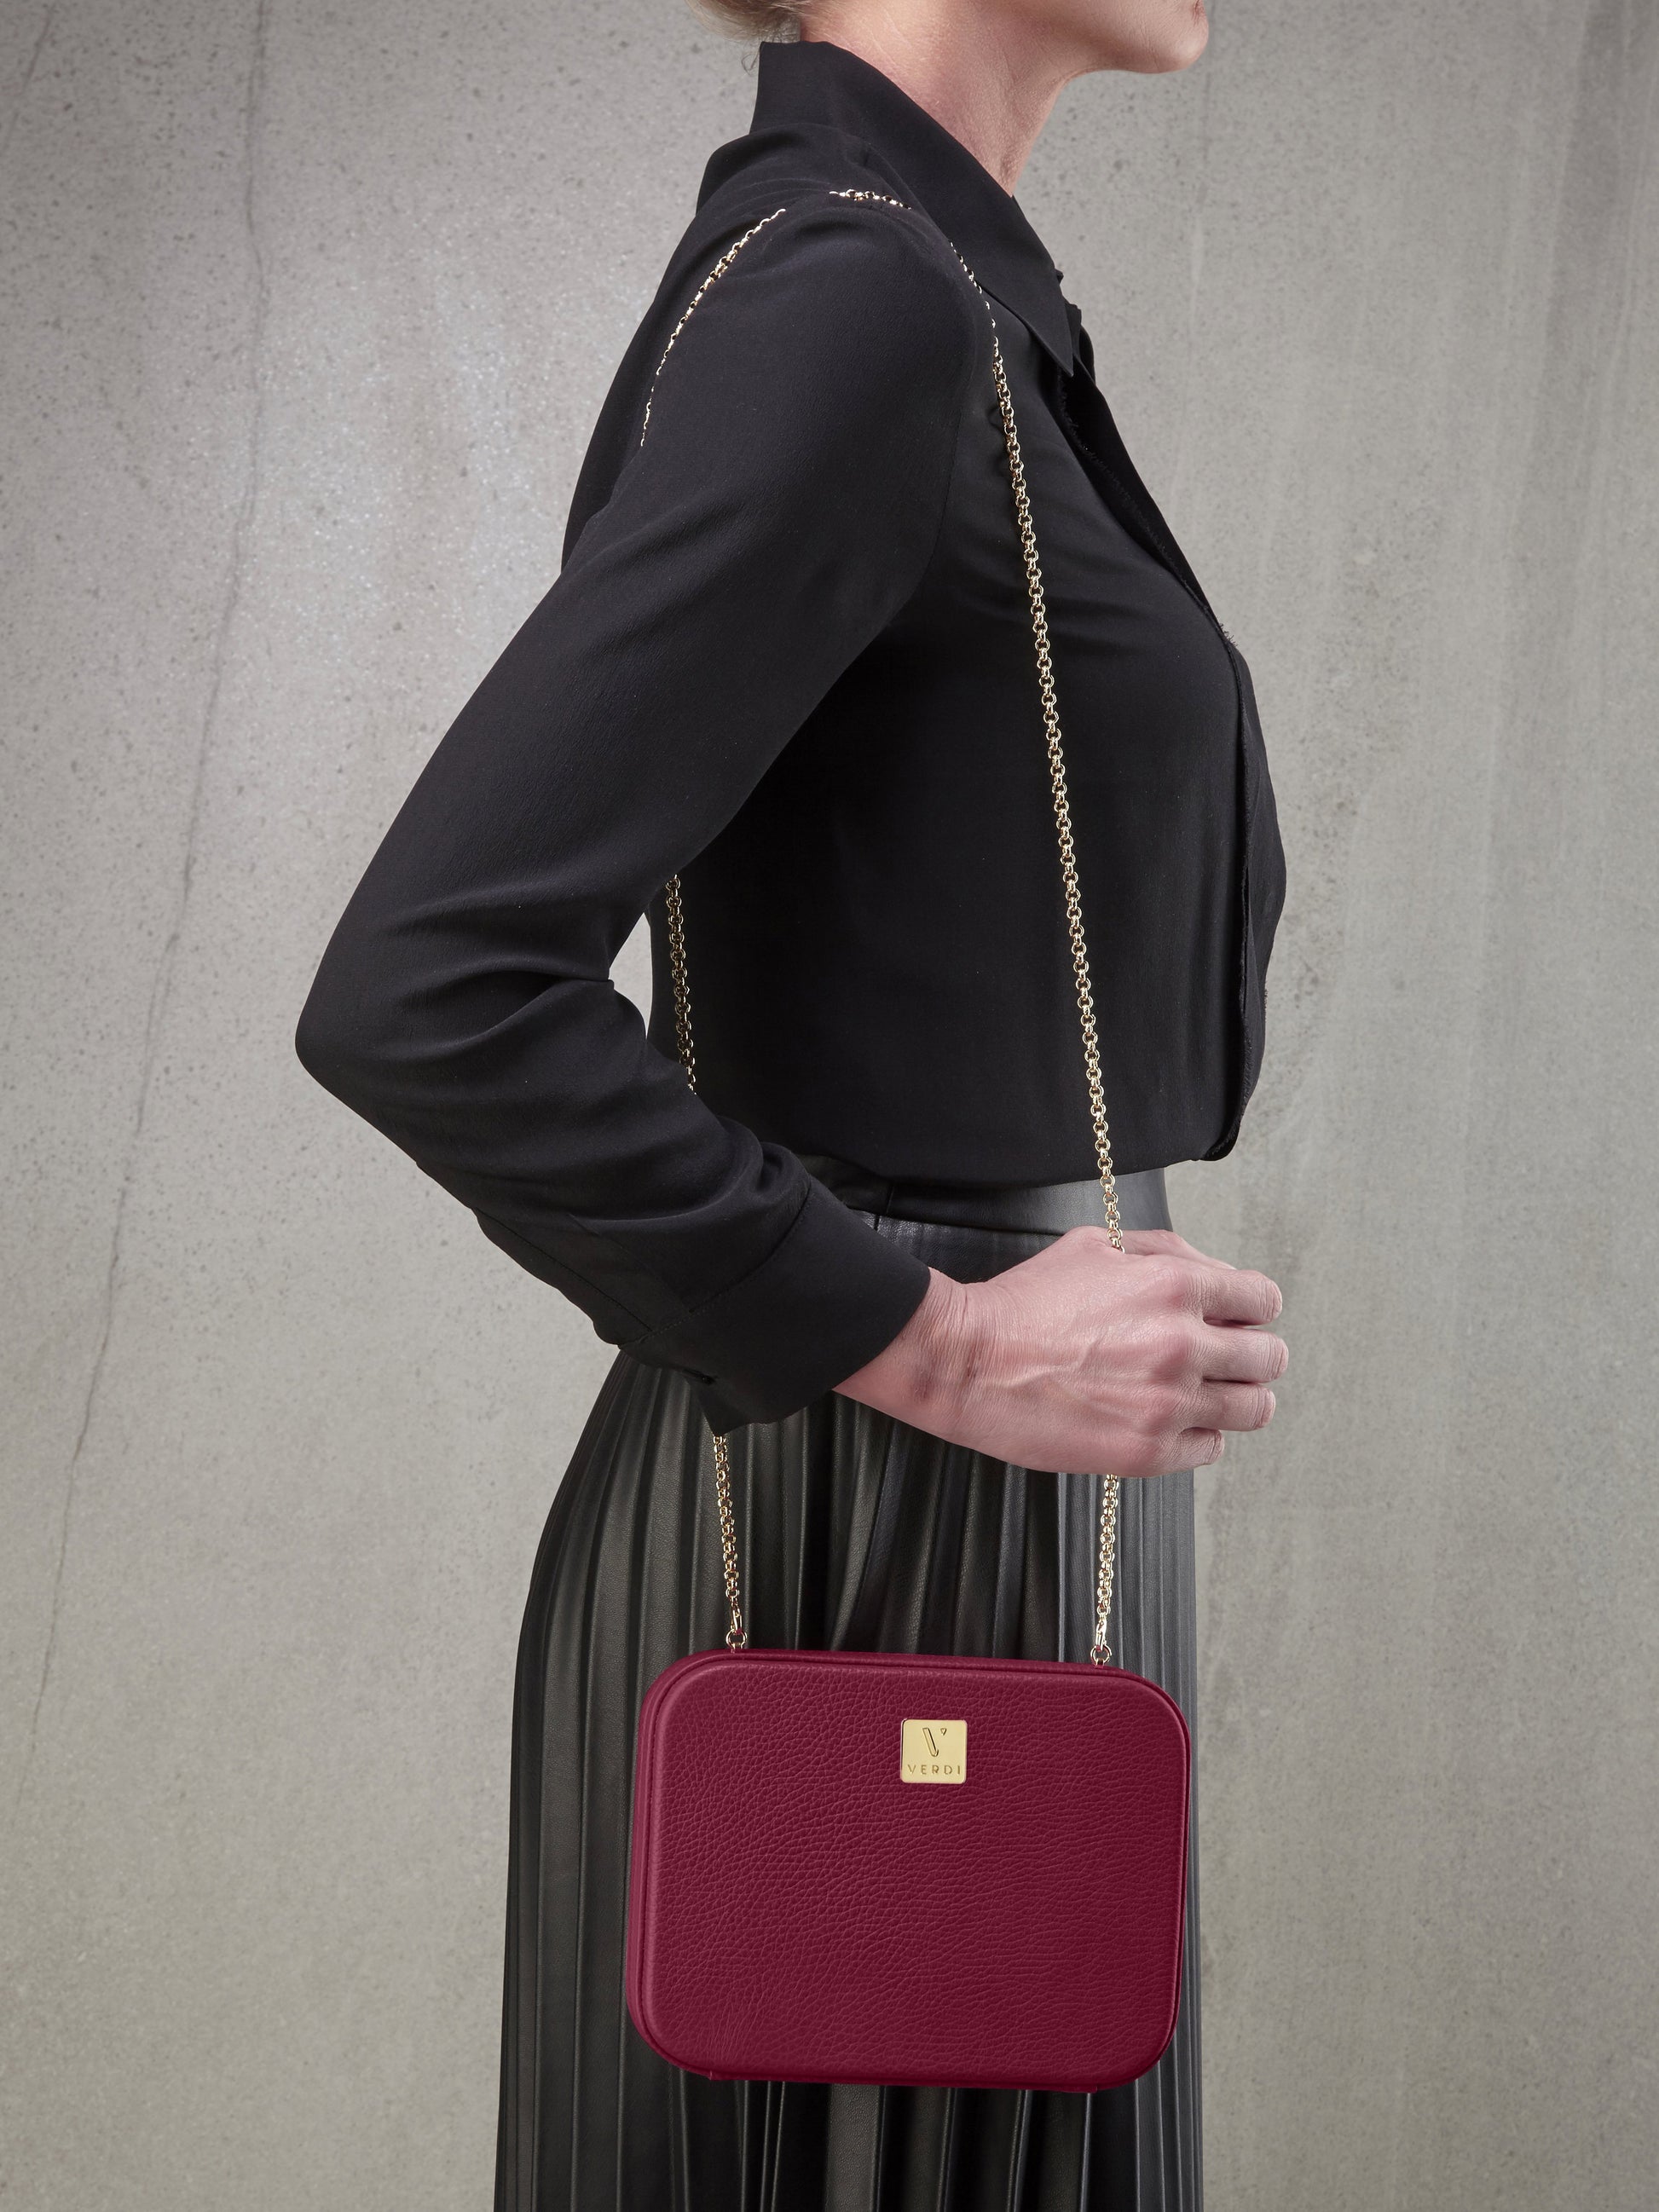 Atelier Verdi pink leather clutch bag worn over the shoulder by model